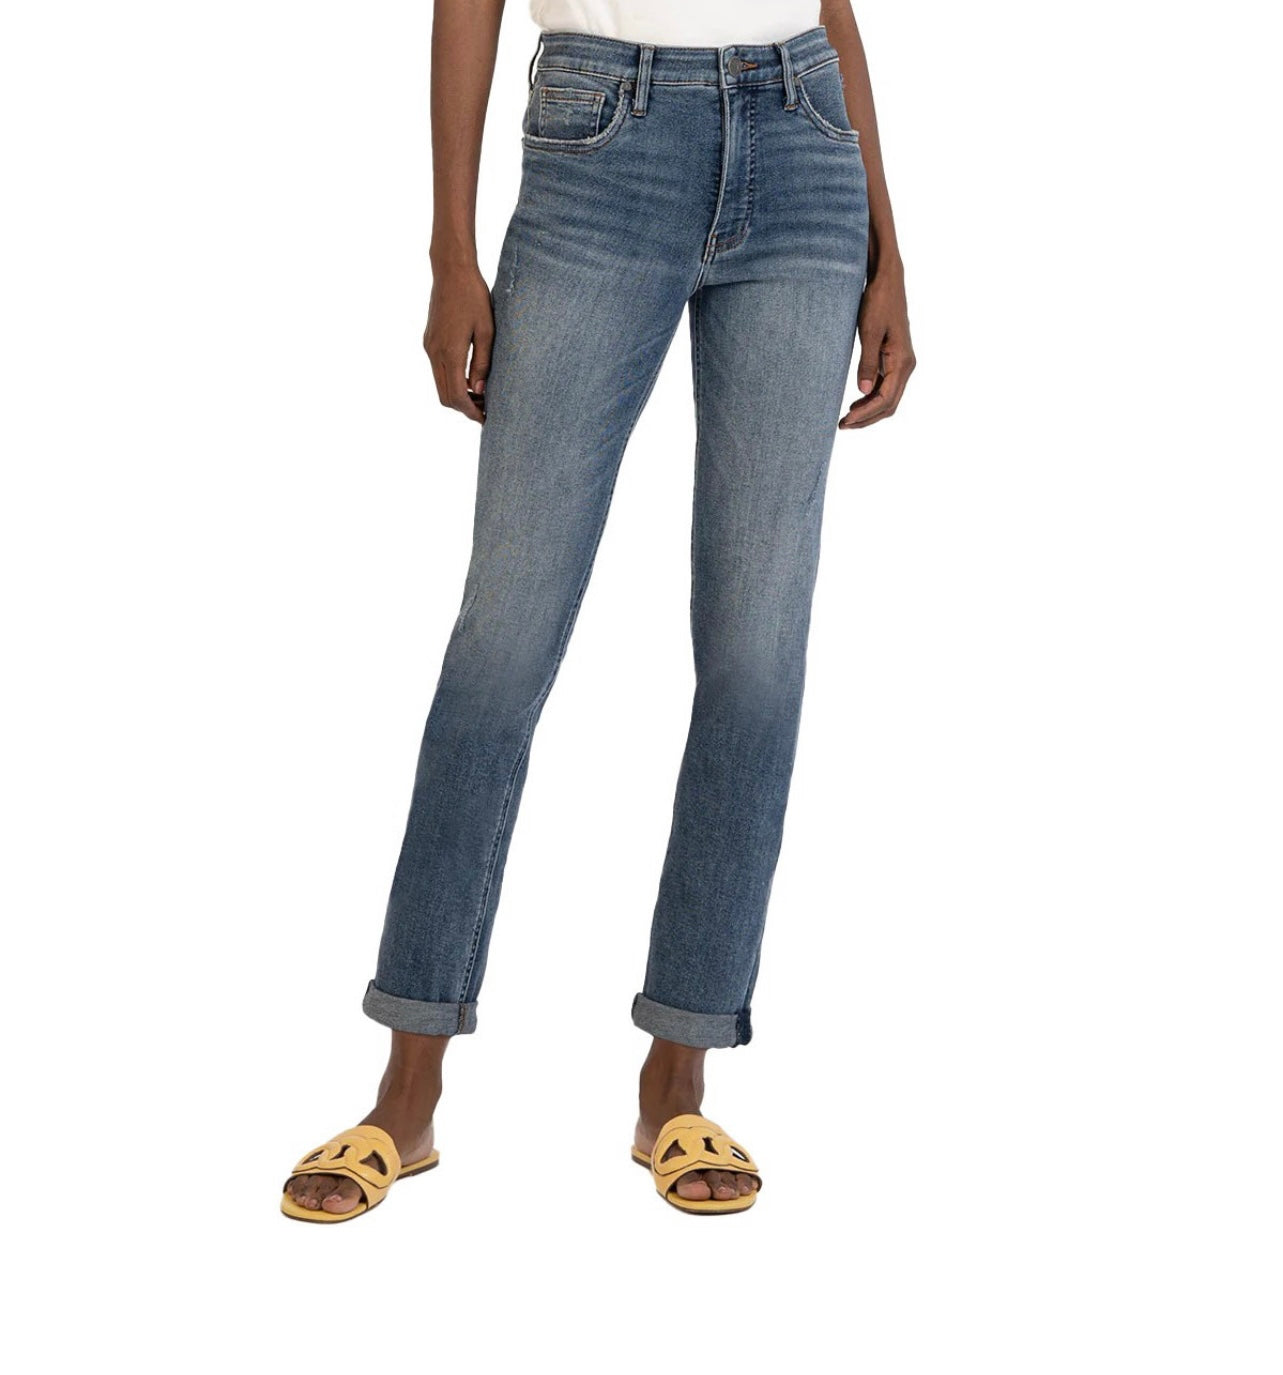 Rachael Fab AB Mom Jeans (Cleanse Wash) Fall-Winter Kut from the Kloth